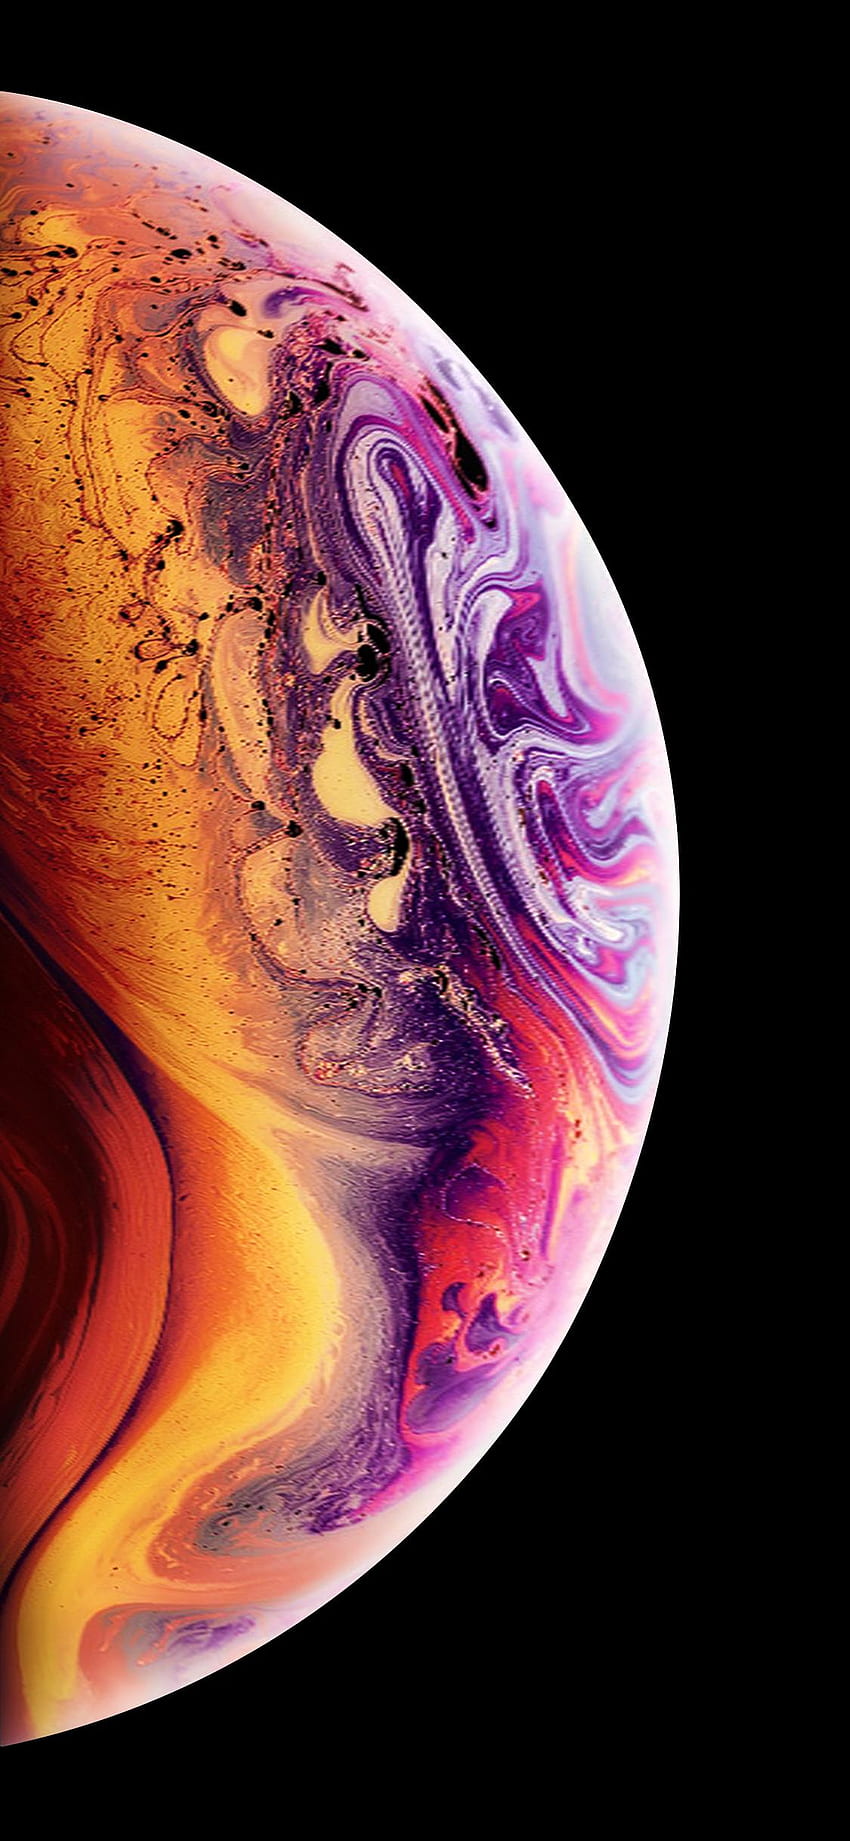 The 2018 iPhone XS Soap Bubble HD phone wallpaper